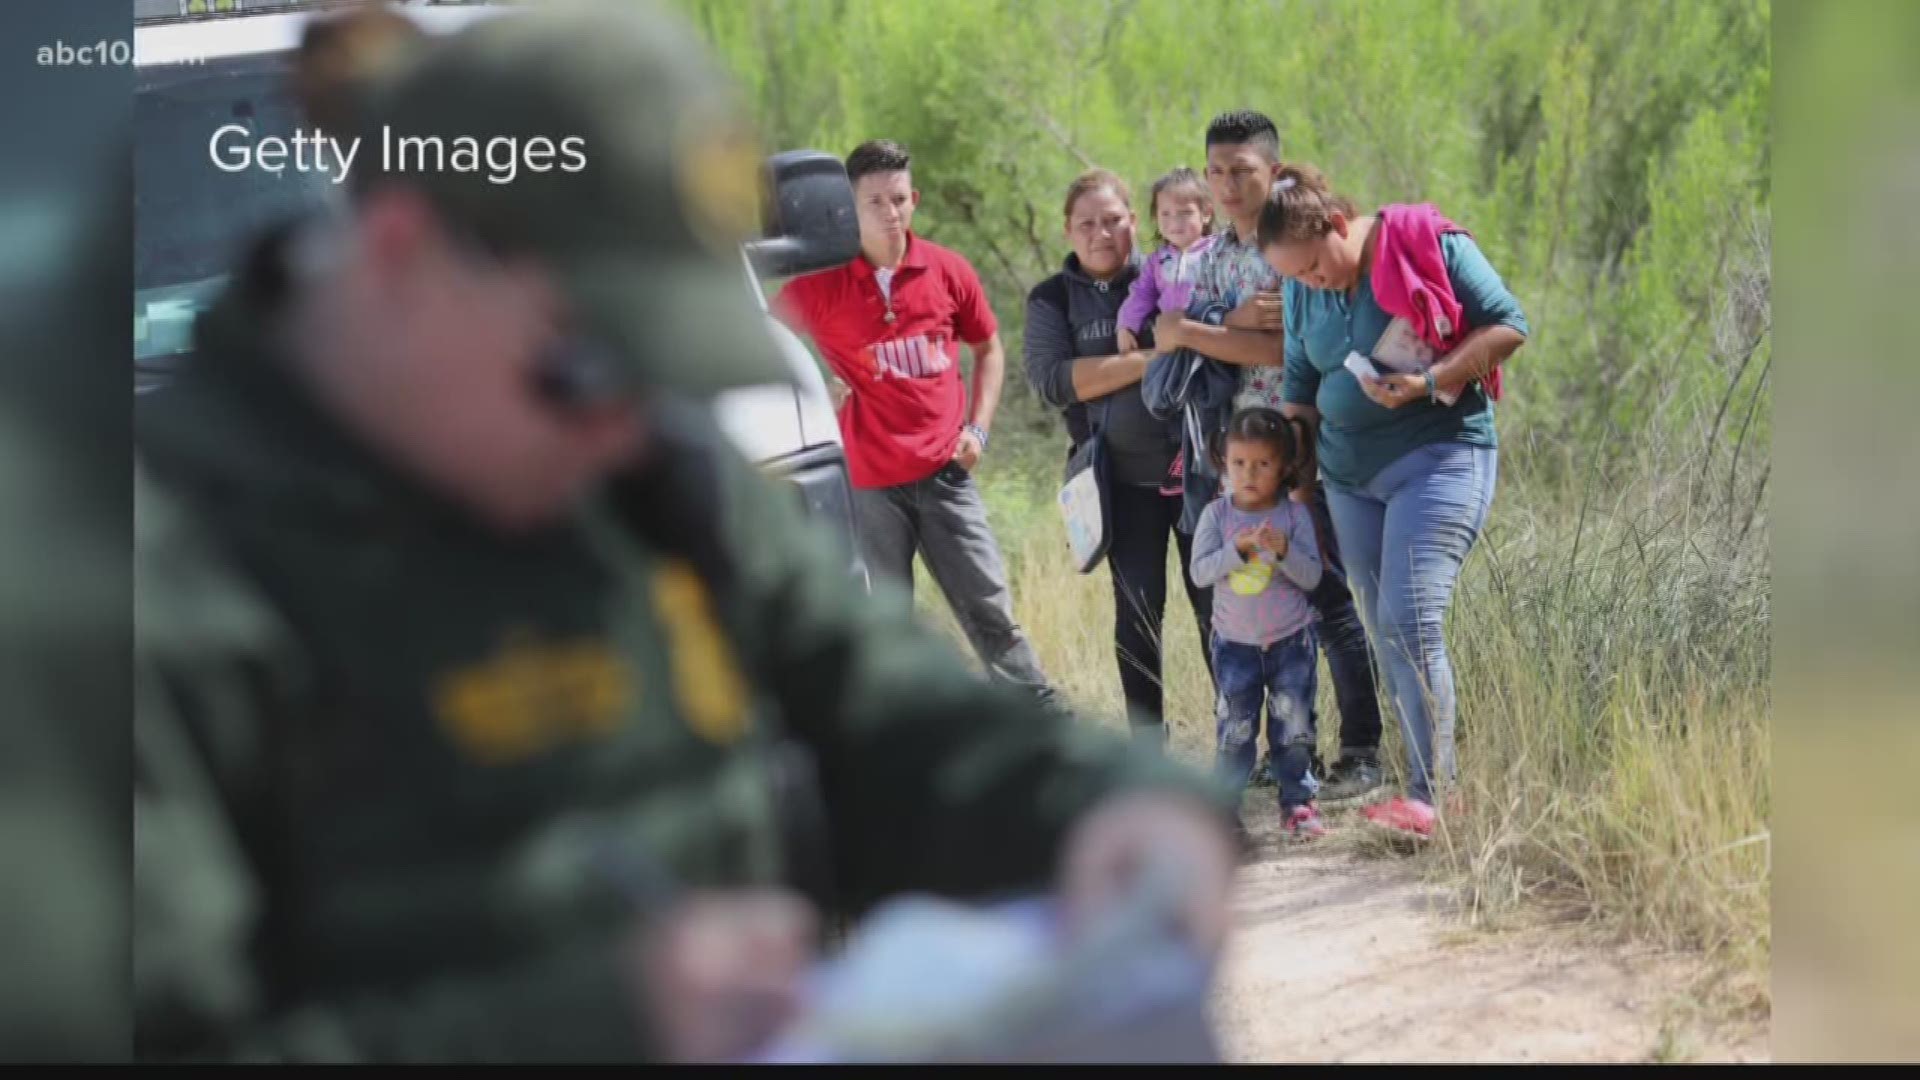 The argument over President Trump's immigration policy continues, and the outcry over the nearly 2,000 child separations caused as a result of the Trump administration's "zero-tolerance" policy on illegal border crossings is growing louder.